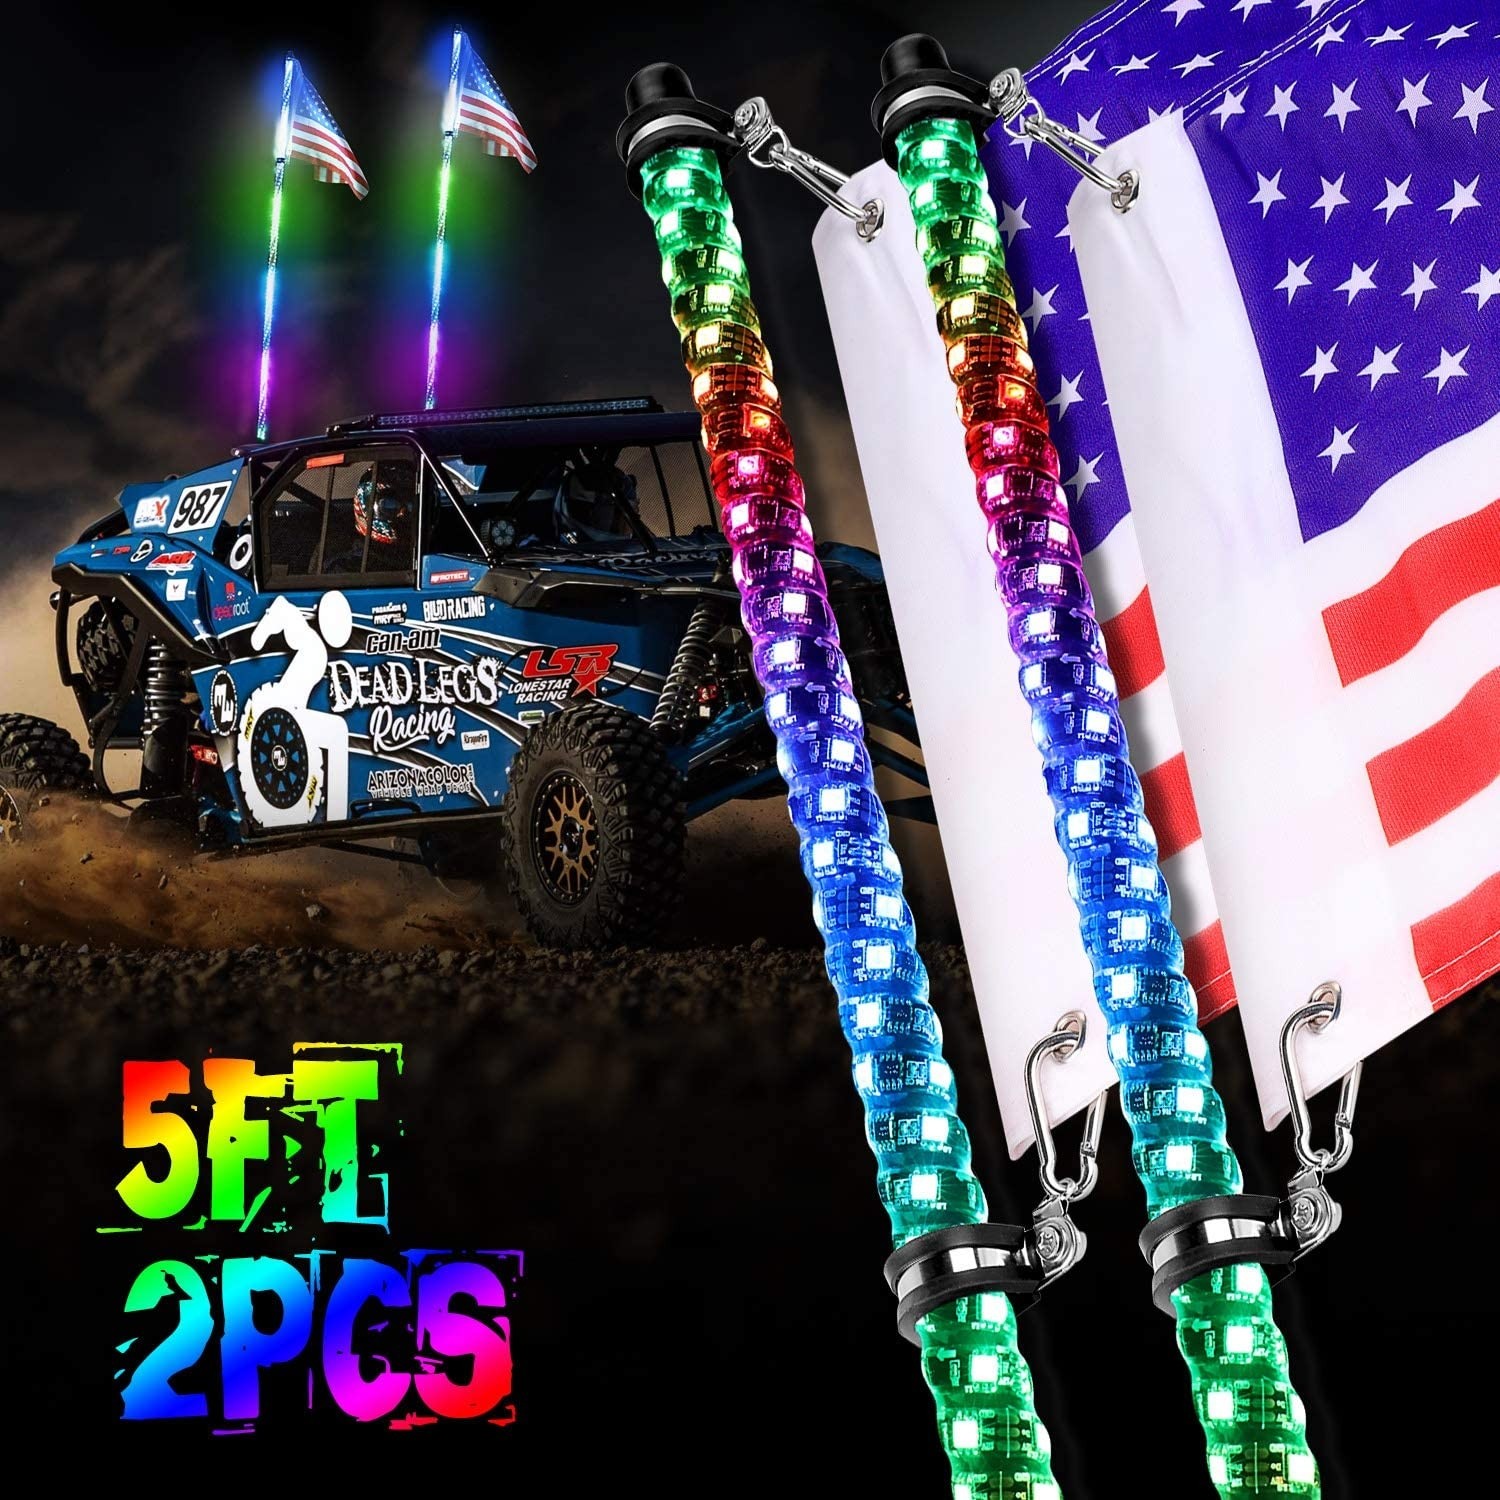 LED Whip Lights, OFFROADTOWN 2PCS 5FT Lighted Whips with Flag RF Remote Control Spiral Dancing/Chasing Light Antenna LED Whips For ATV UTV RZR Jeep Trucks 4X4 Buggy Dune 